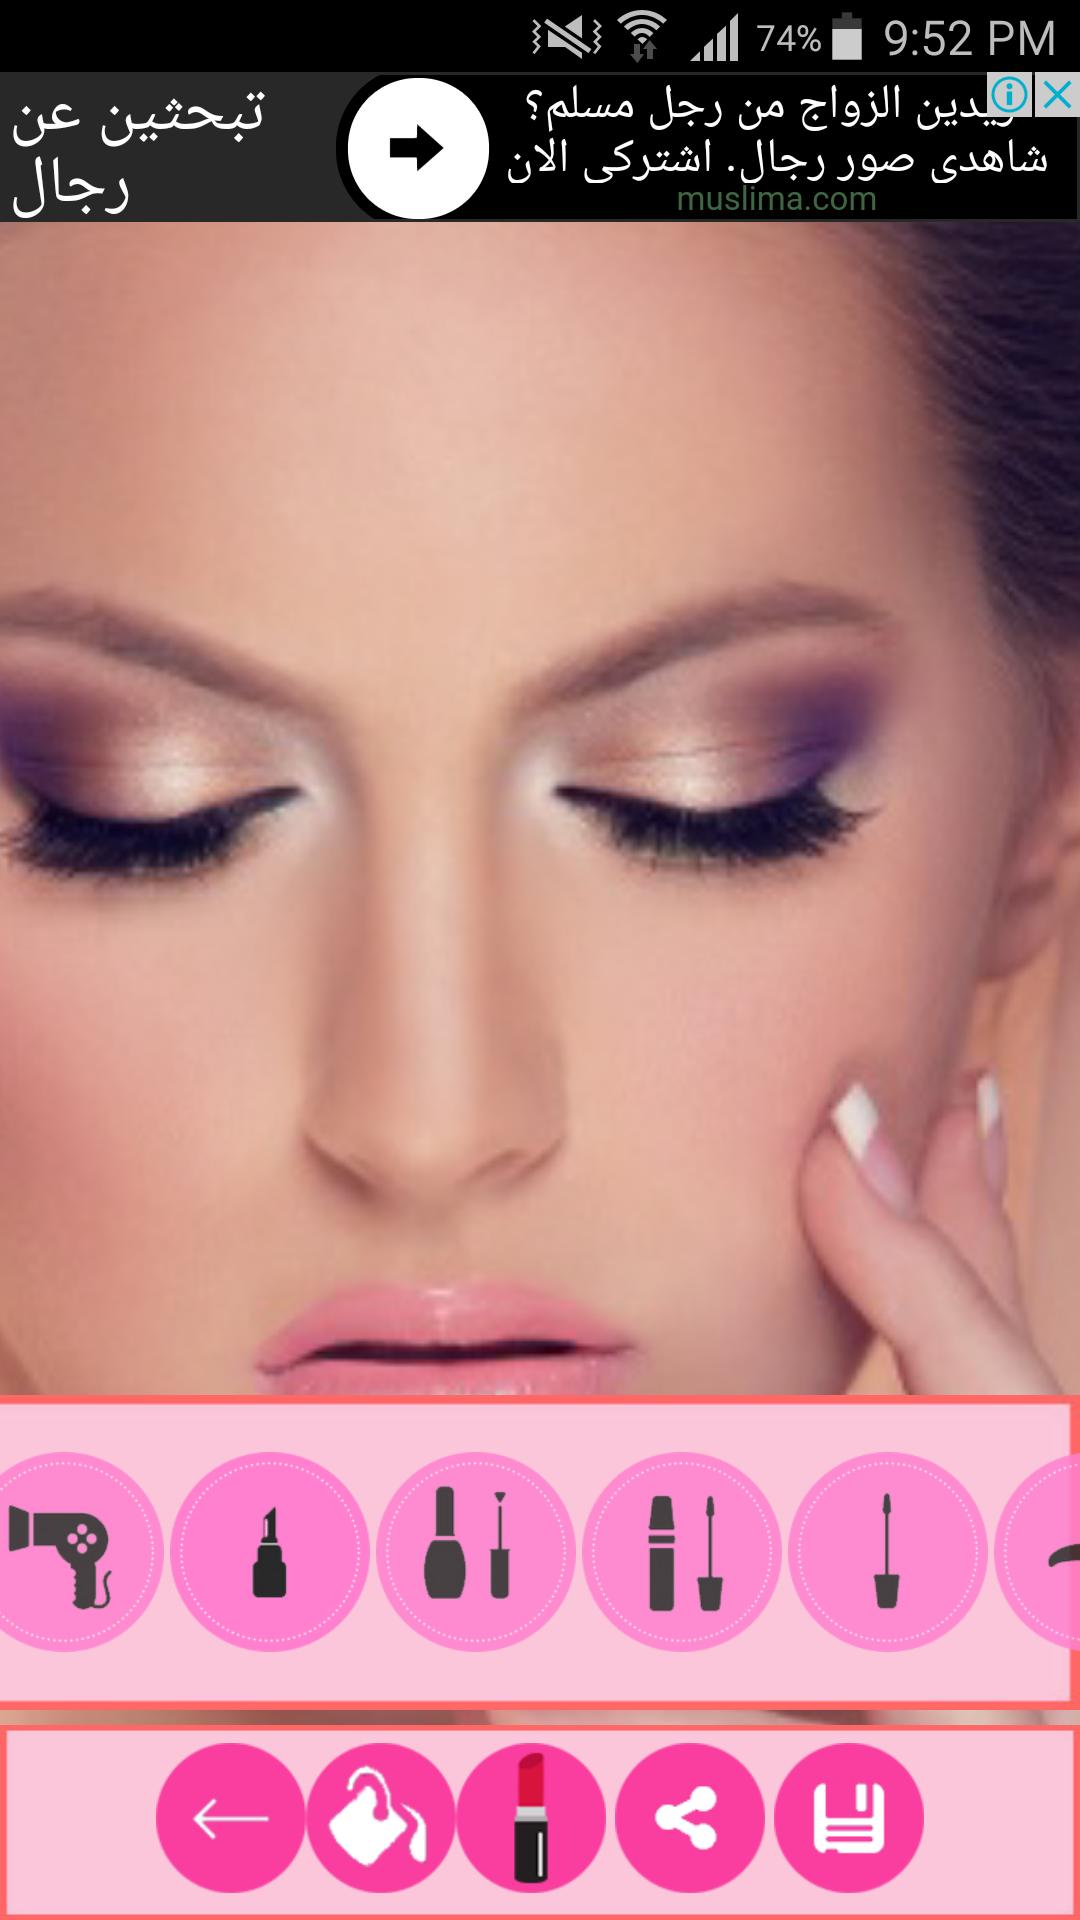 Makeup Plus Beauty for Android - APK Download